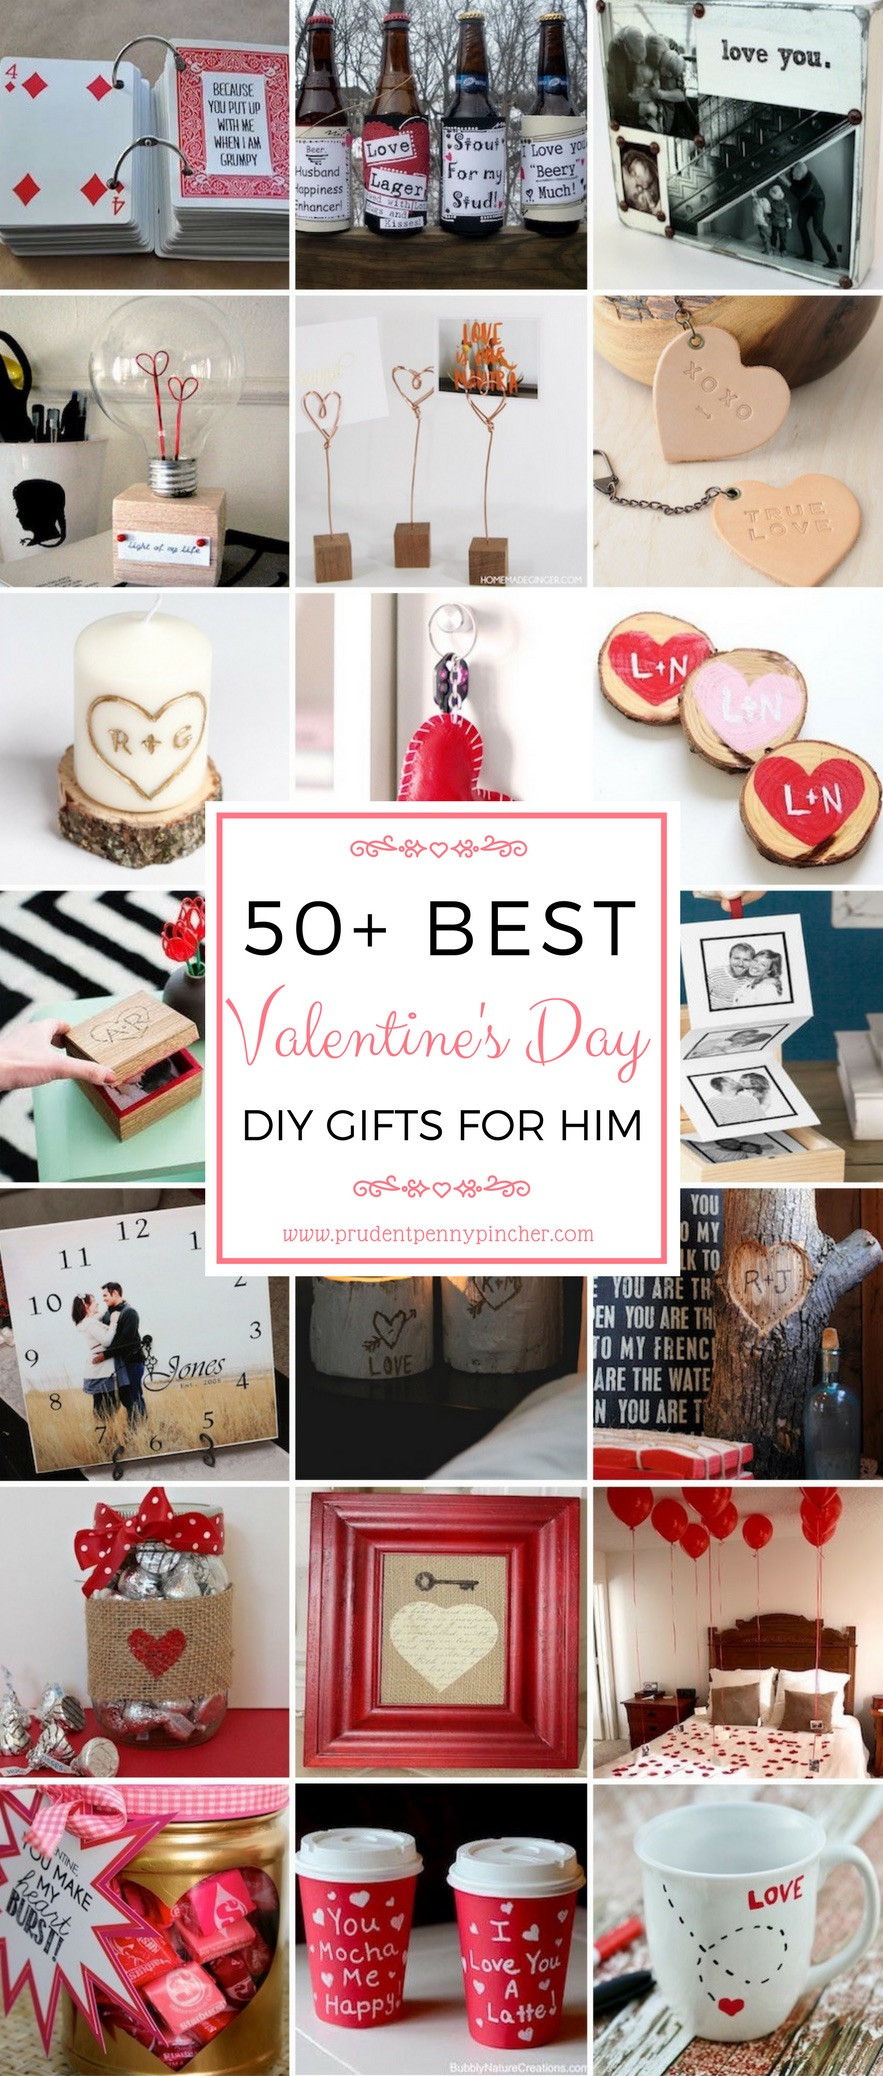 Valentines DIY Gifts For Him
 50 DIY Valentines Day Gifts for Him Prudent Penny Pincher